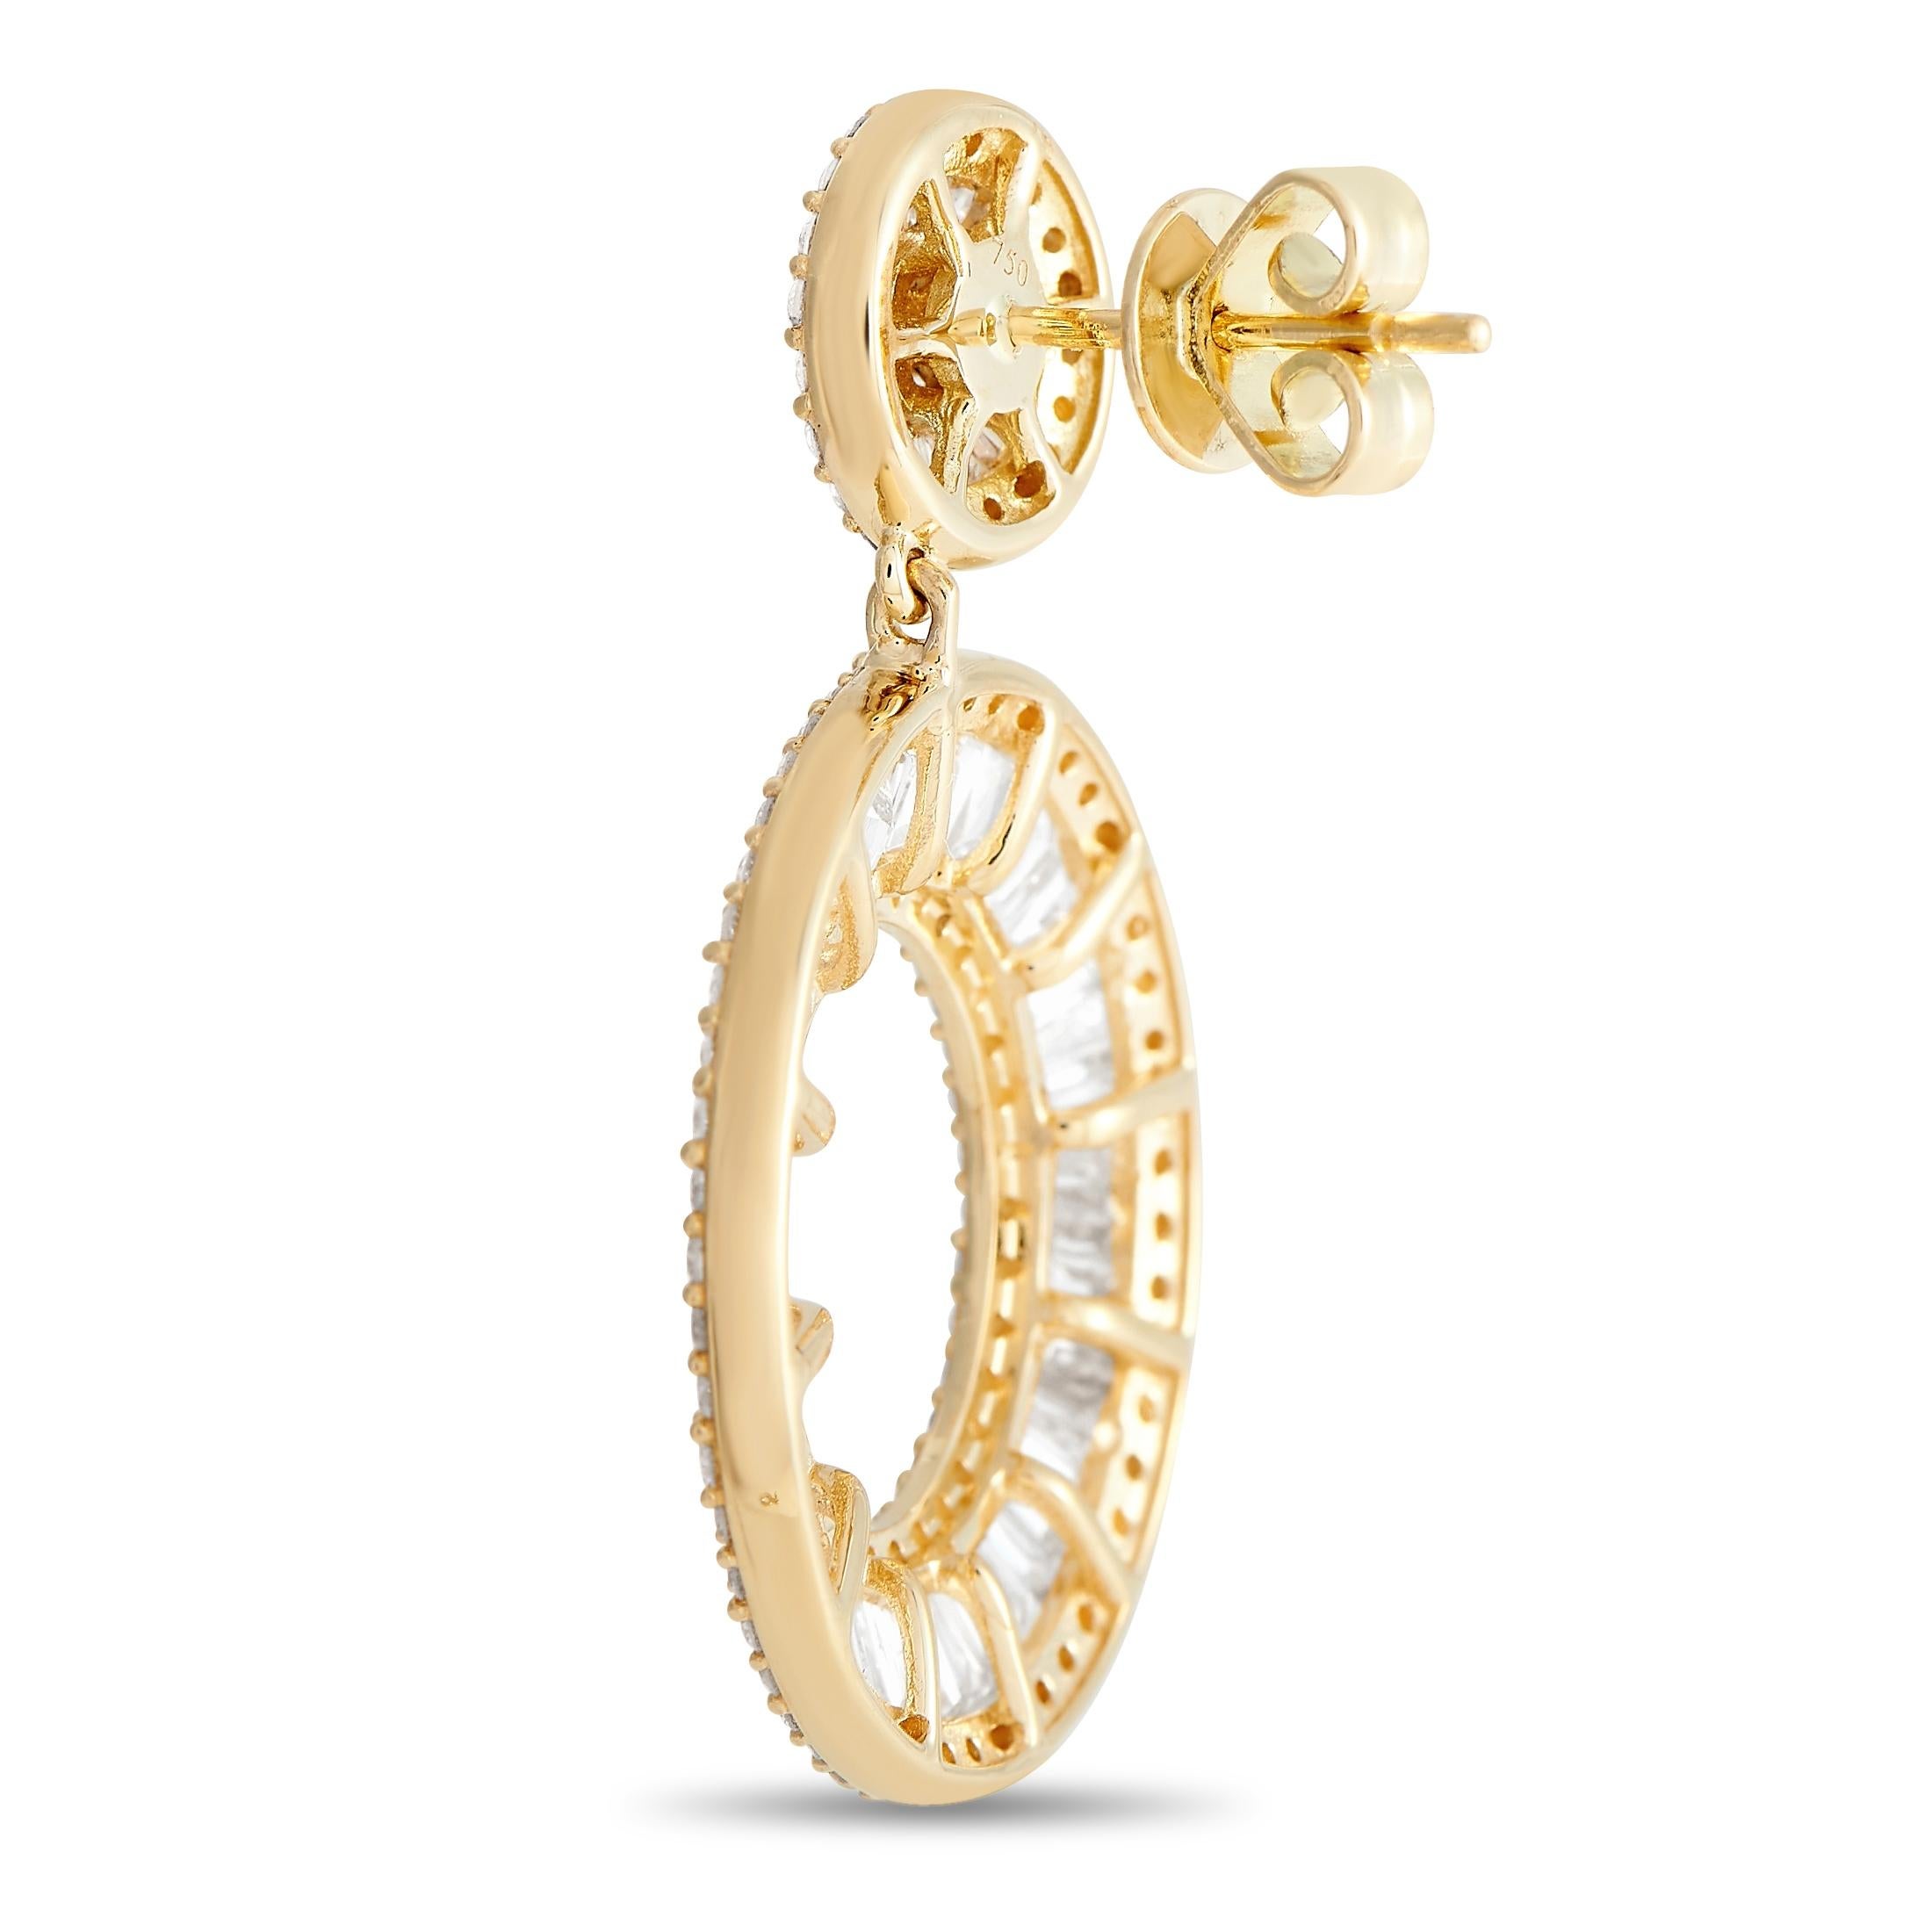 These dynamic earrings will continually make a statement. Each classically elegant setting measures 1.25” long, 0.88” wide, and is crafted from a combination of 18K Yellow Gold and 18K White Gold. Diamond baguettes totaling 3.39 carats and